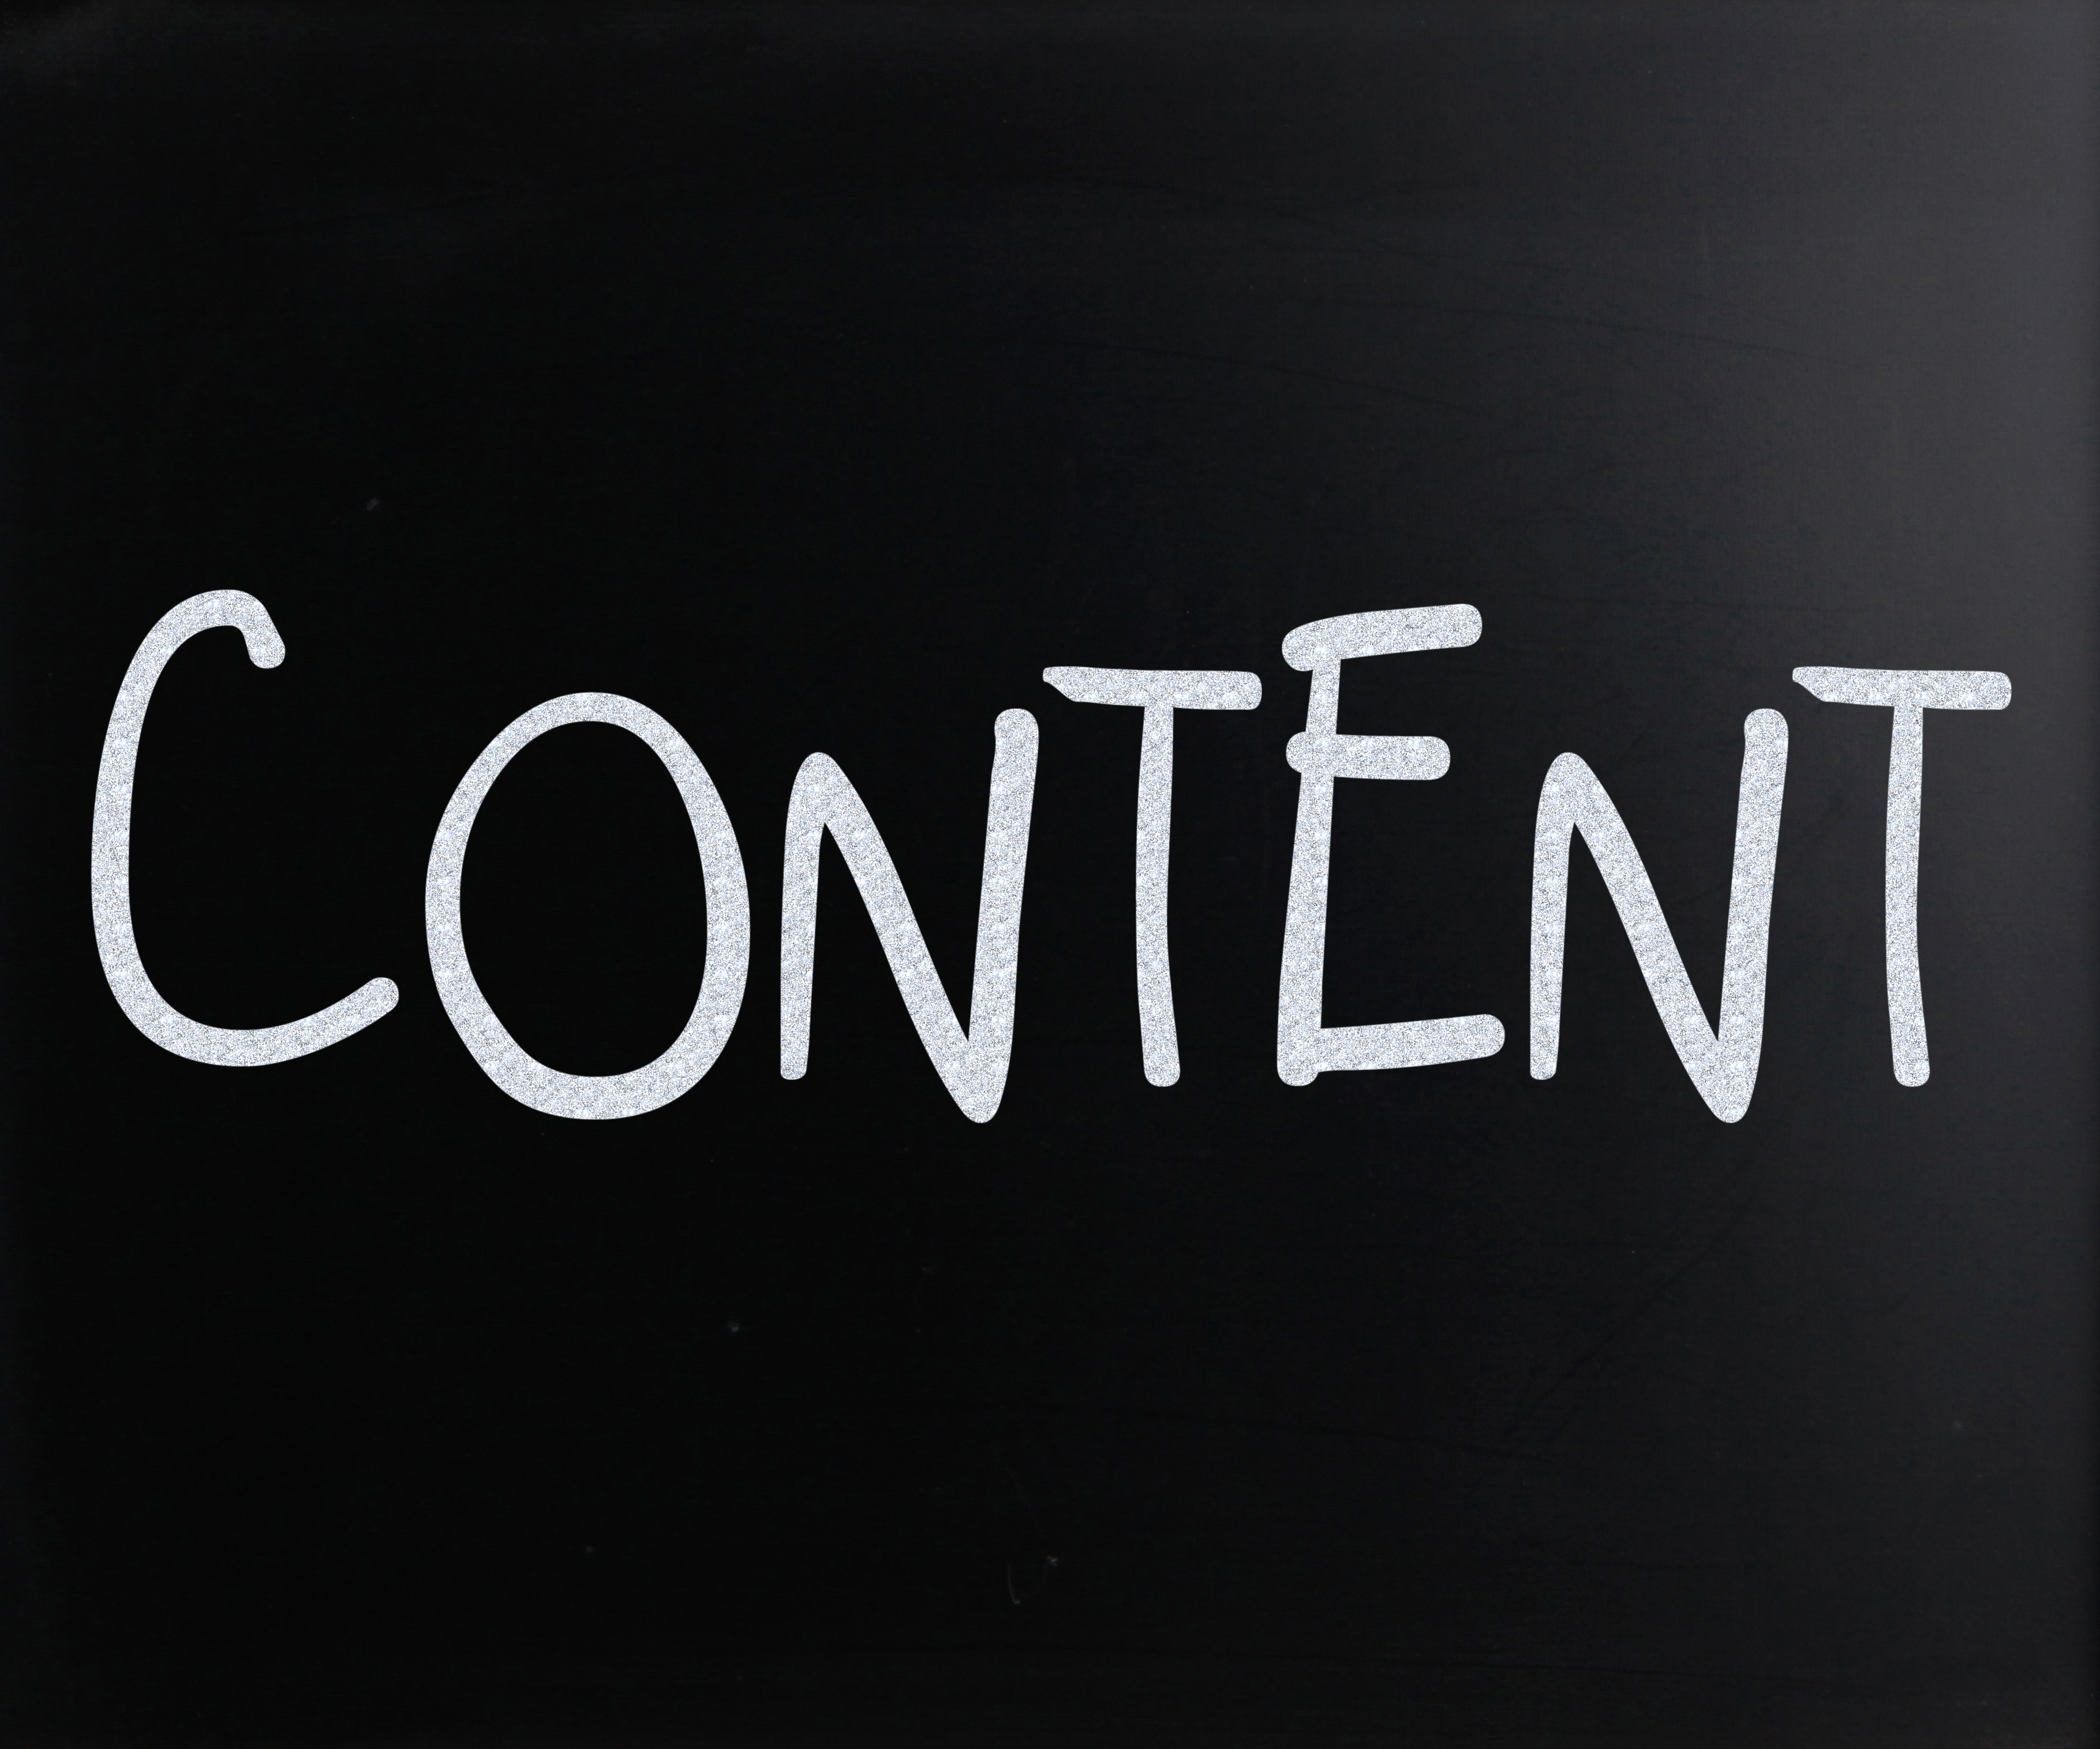 As long as Your Content is lengthy, it can’t be tempting